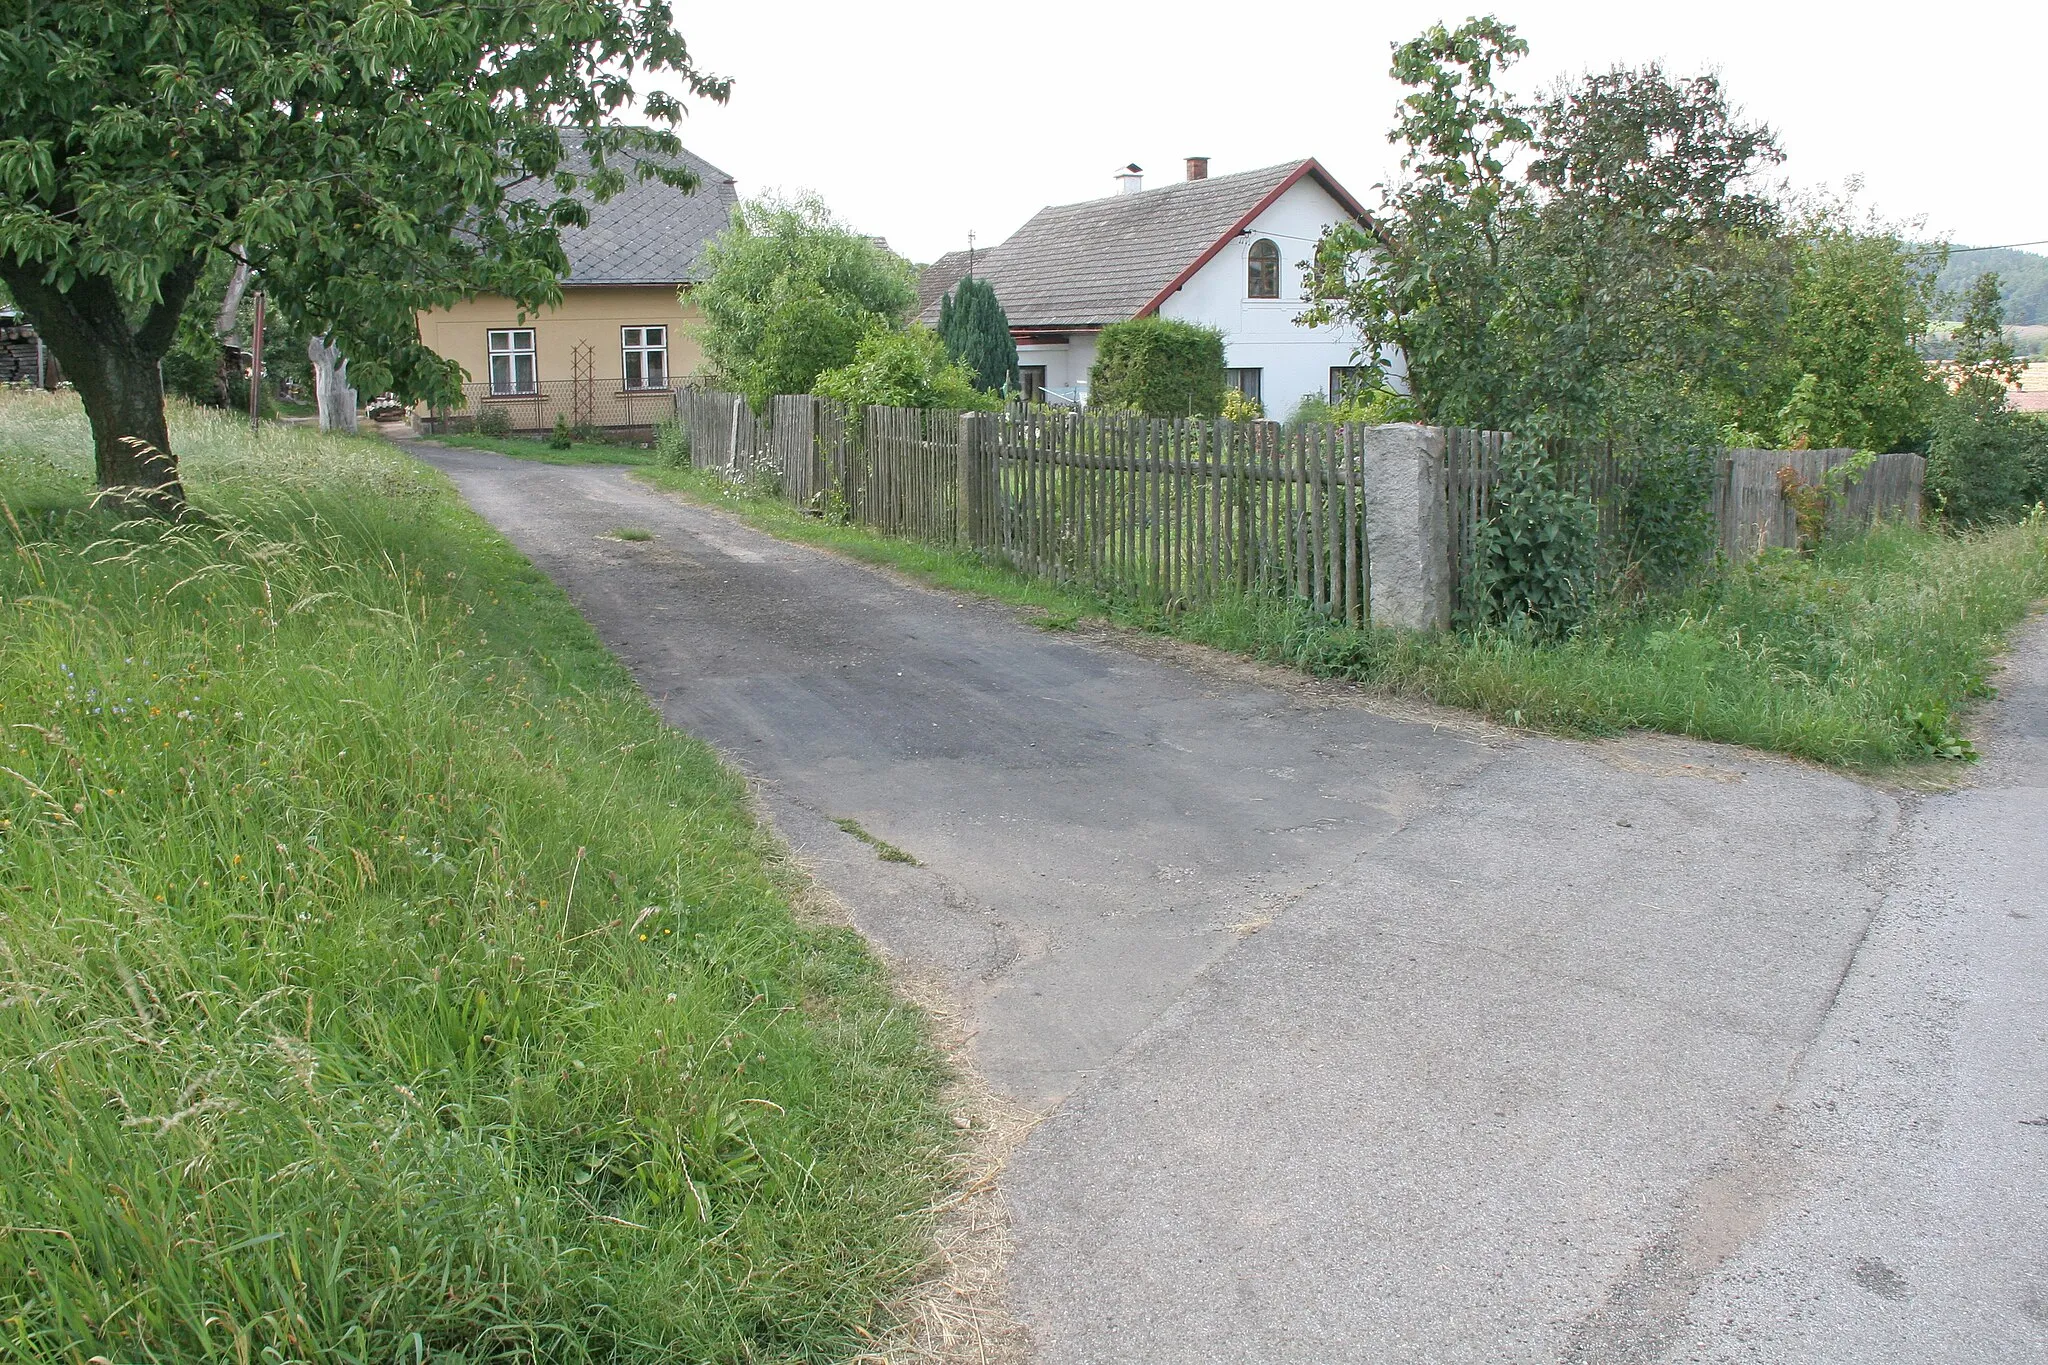 Photo showing: Dolní Dehtov čp. 12
Camera location 50° 25′ 33.52″ N, 15° 43′ 30.78″ E View this and other nearby images on: OpenStreetMap 50.425979;   15.725217

This file was created as a part of the photographic program of Wikimedia Czech Republic. Project: Foto českých obcí The program supports Wikimedia Commons photographers in the Czech Republic.